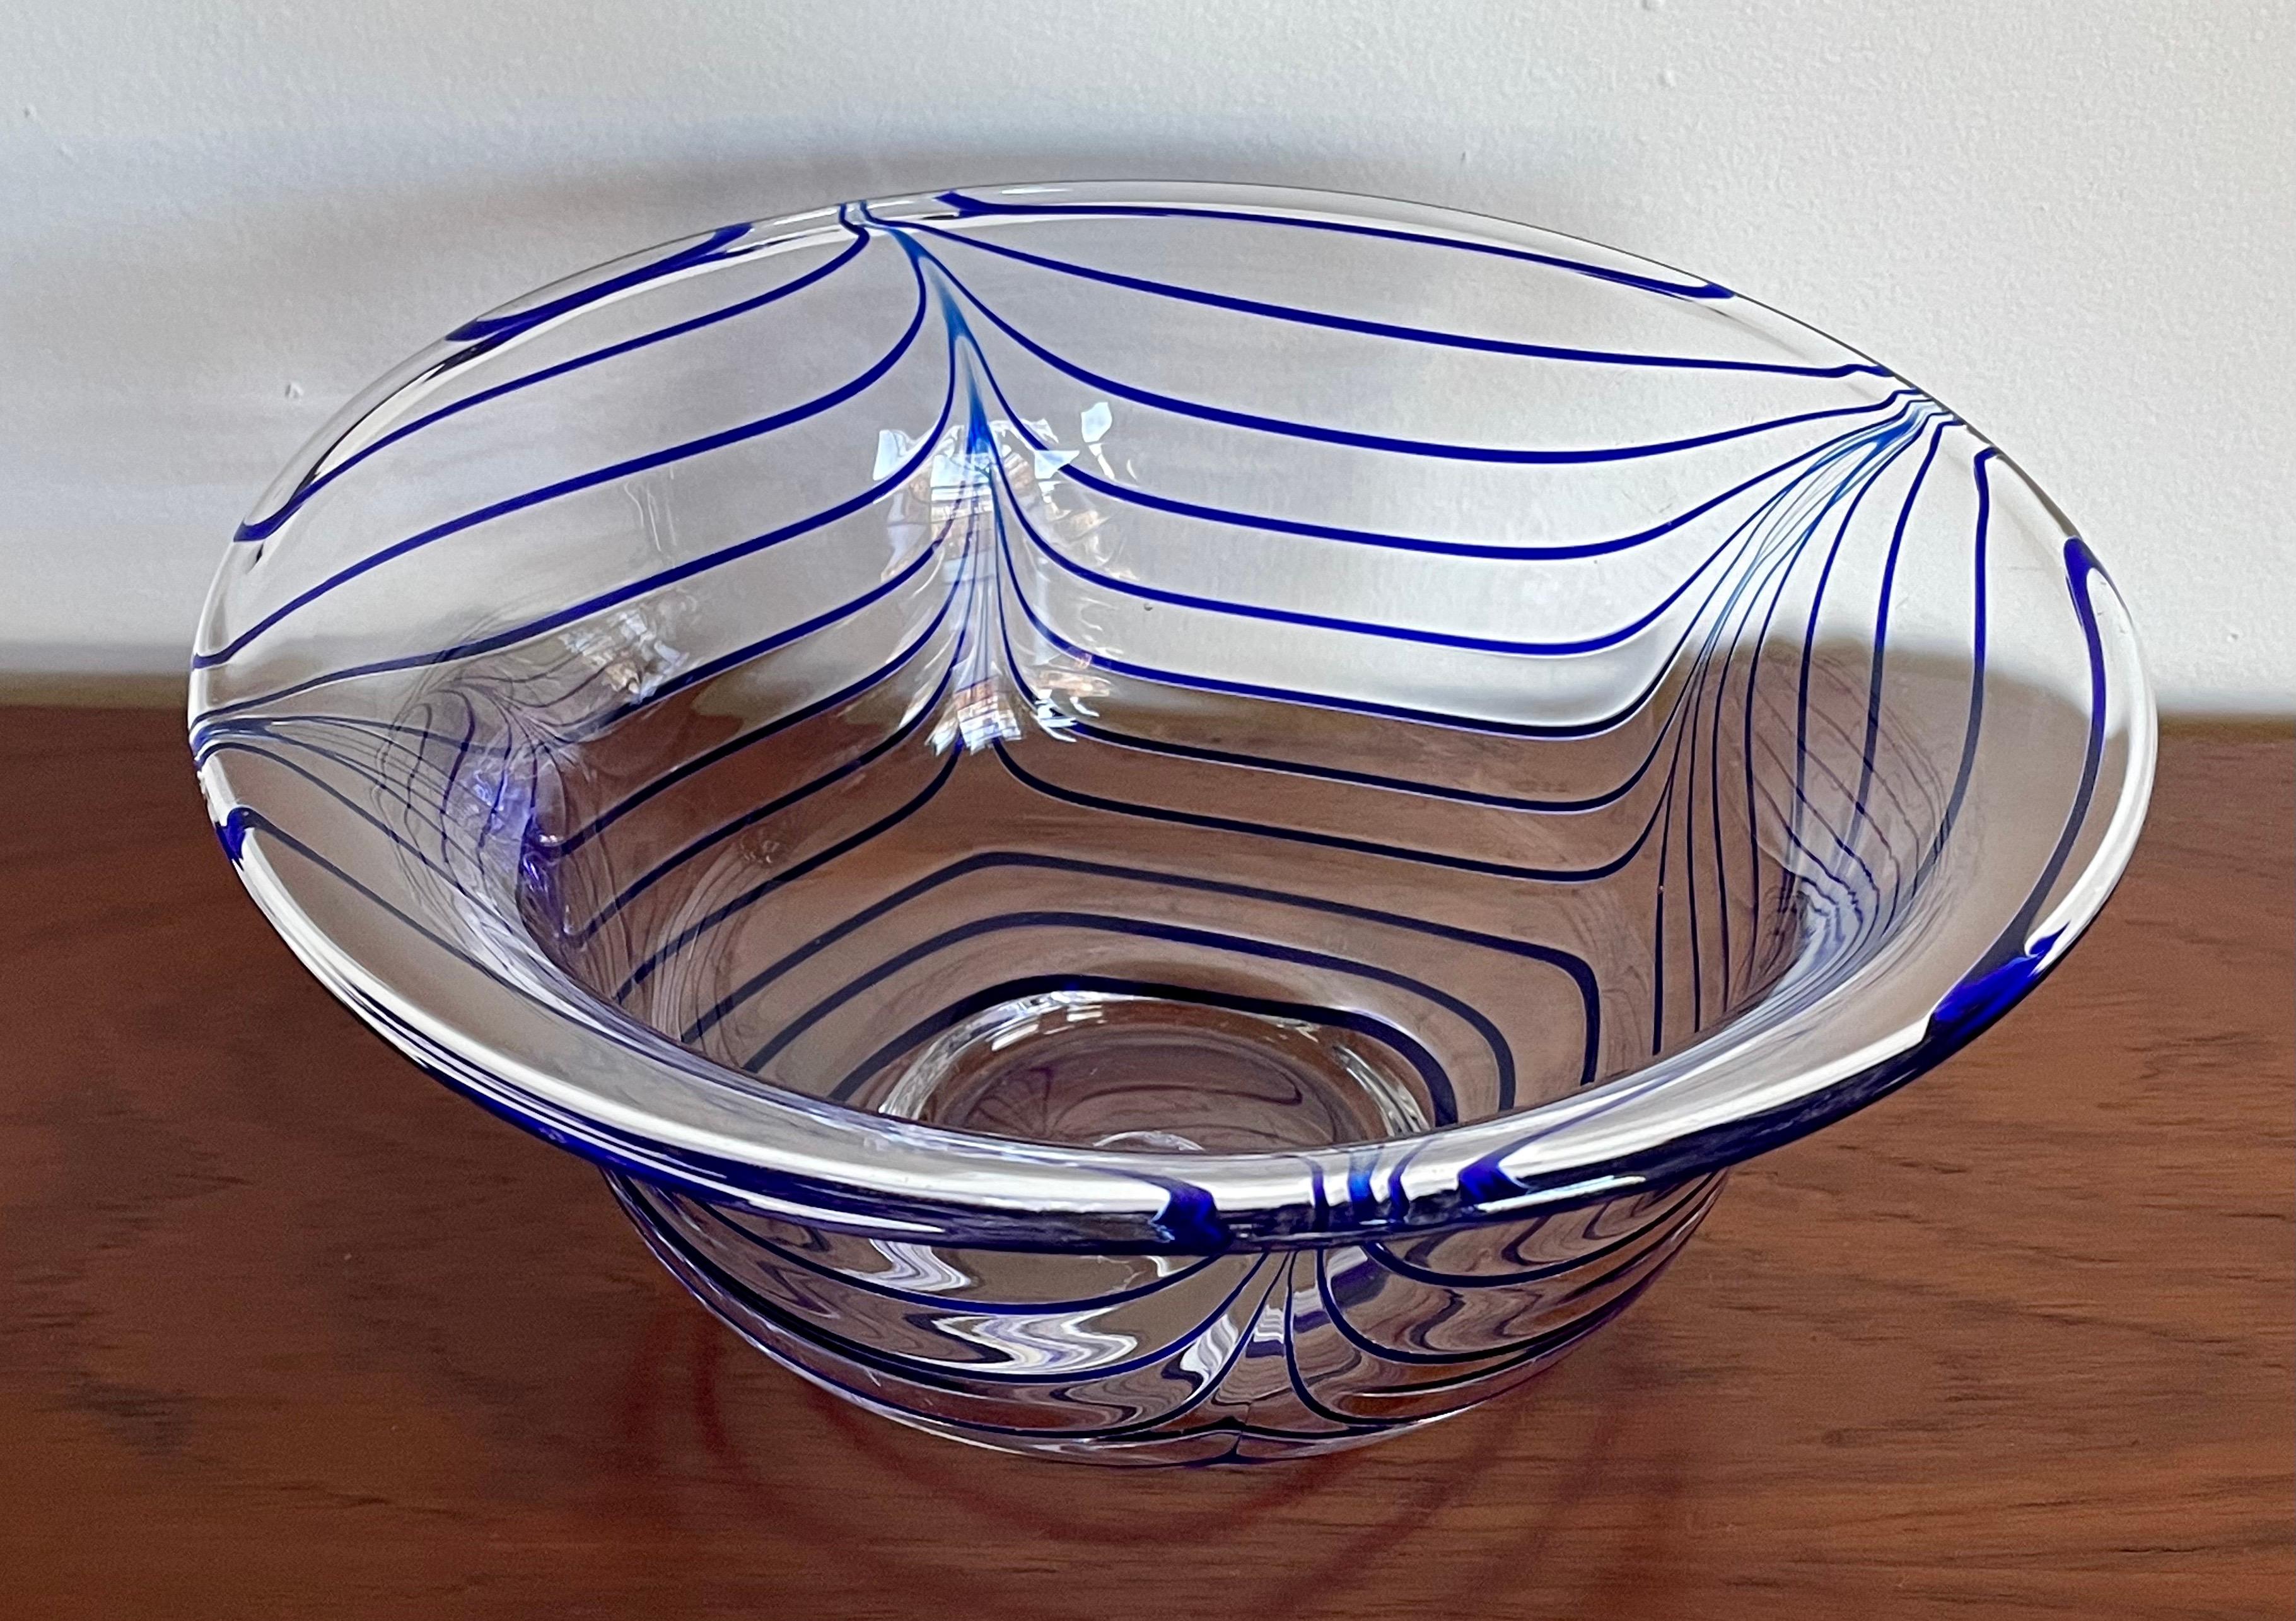 Beautiful hand-blown Murano glass decorative bowl with vibrant blue line details within. Initialed with the letter 